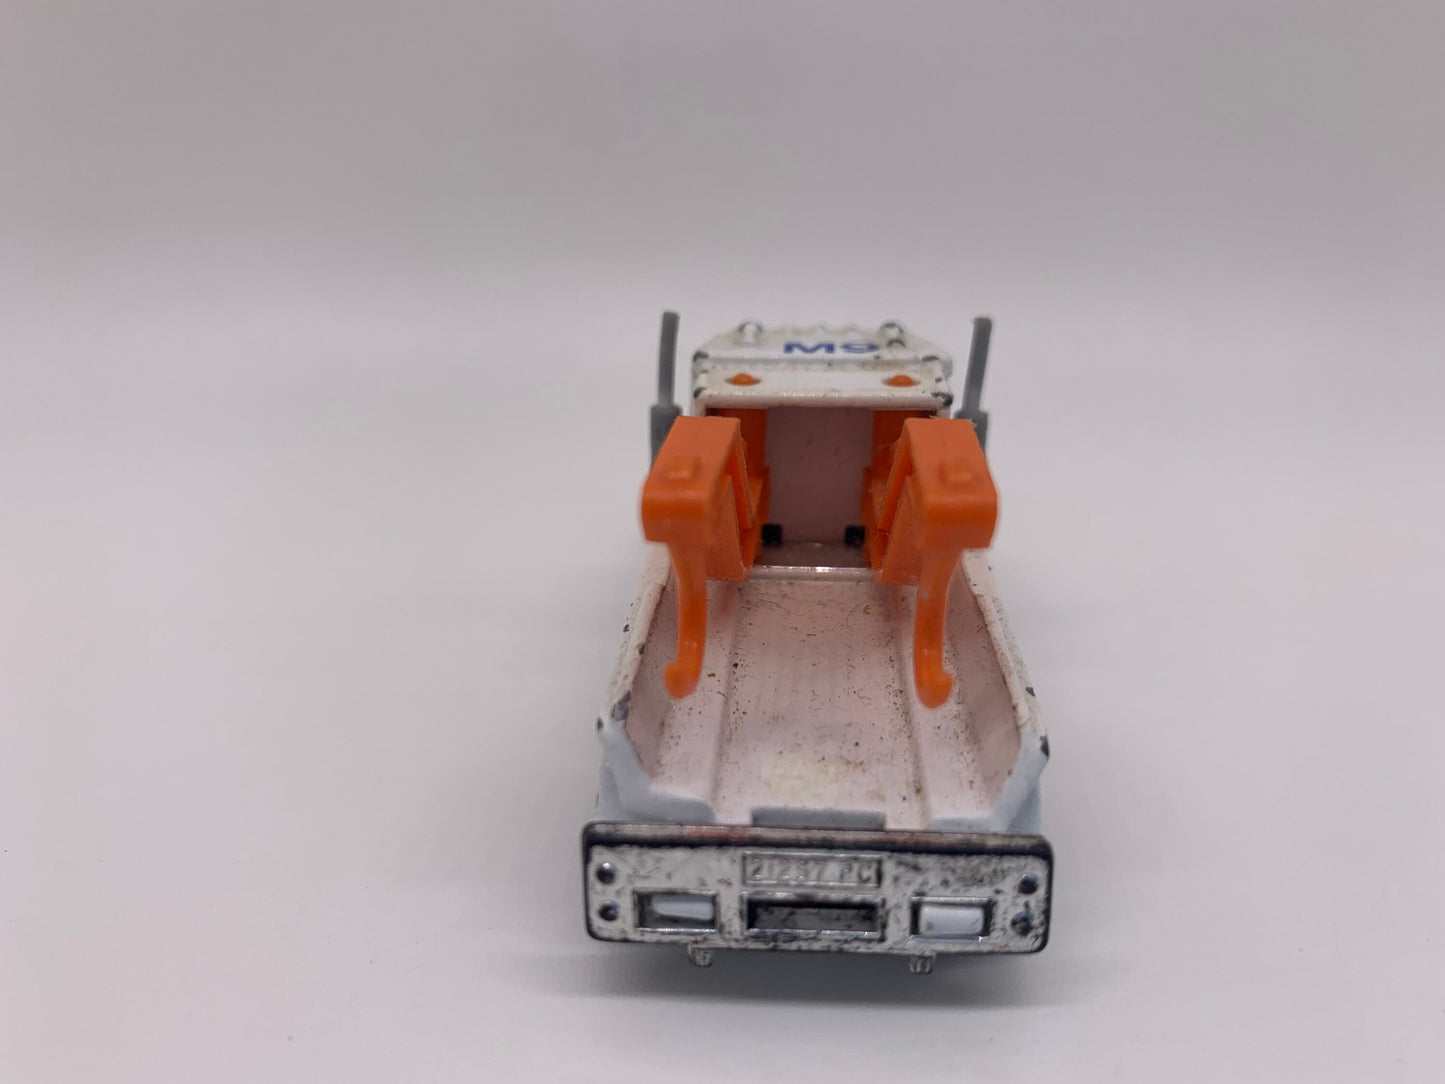 Matchbox Peterbilt Wreck Truck Police M9 White Perfect Birthday Gift Miniature Collectable Scale Model Toy Car